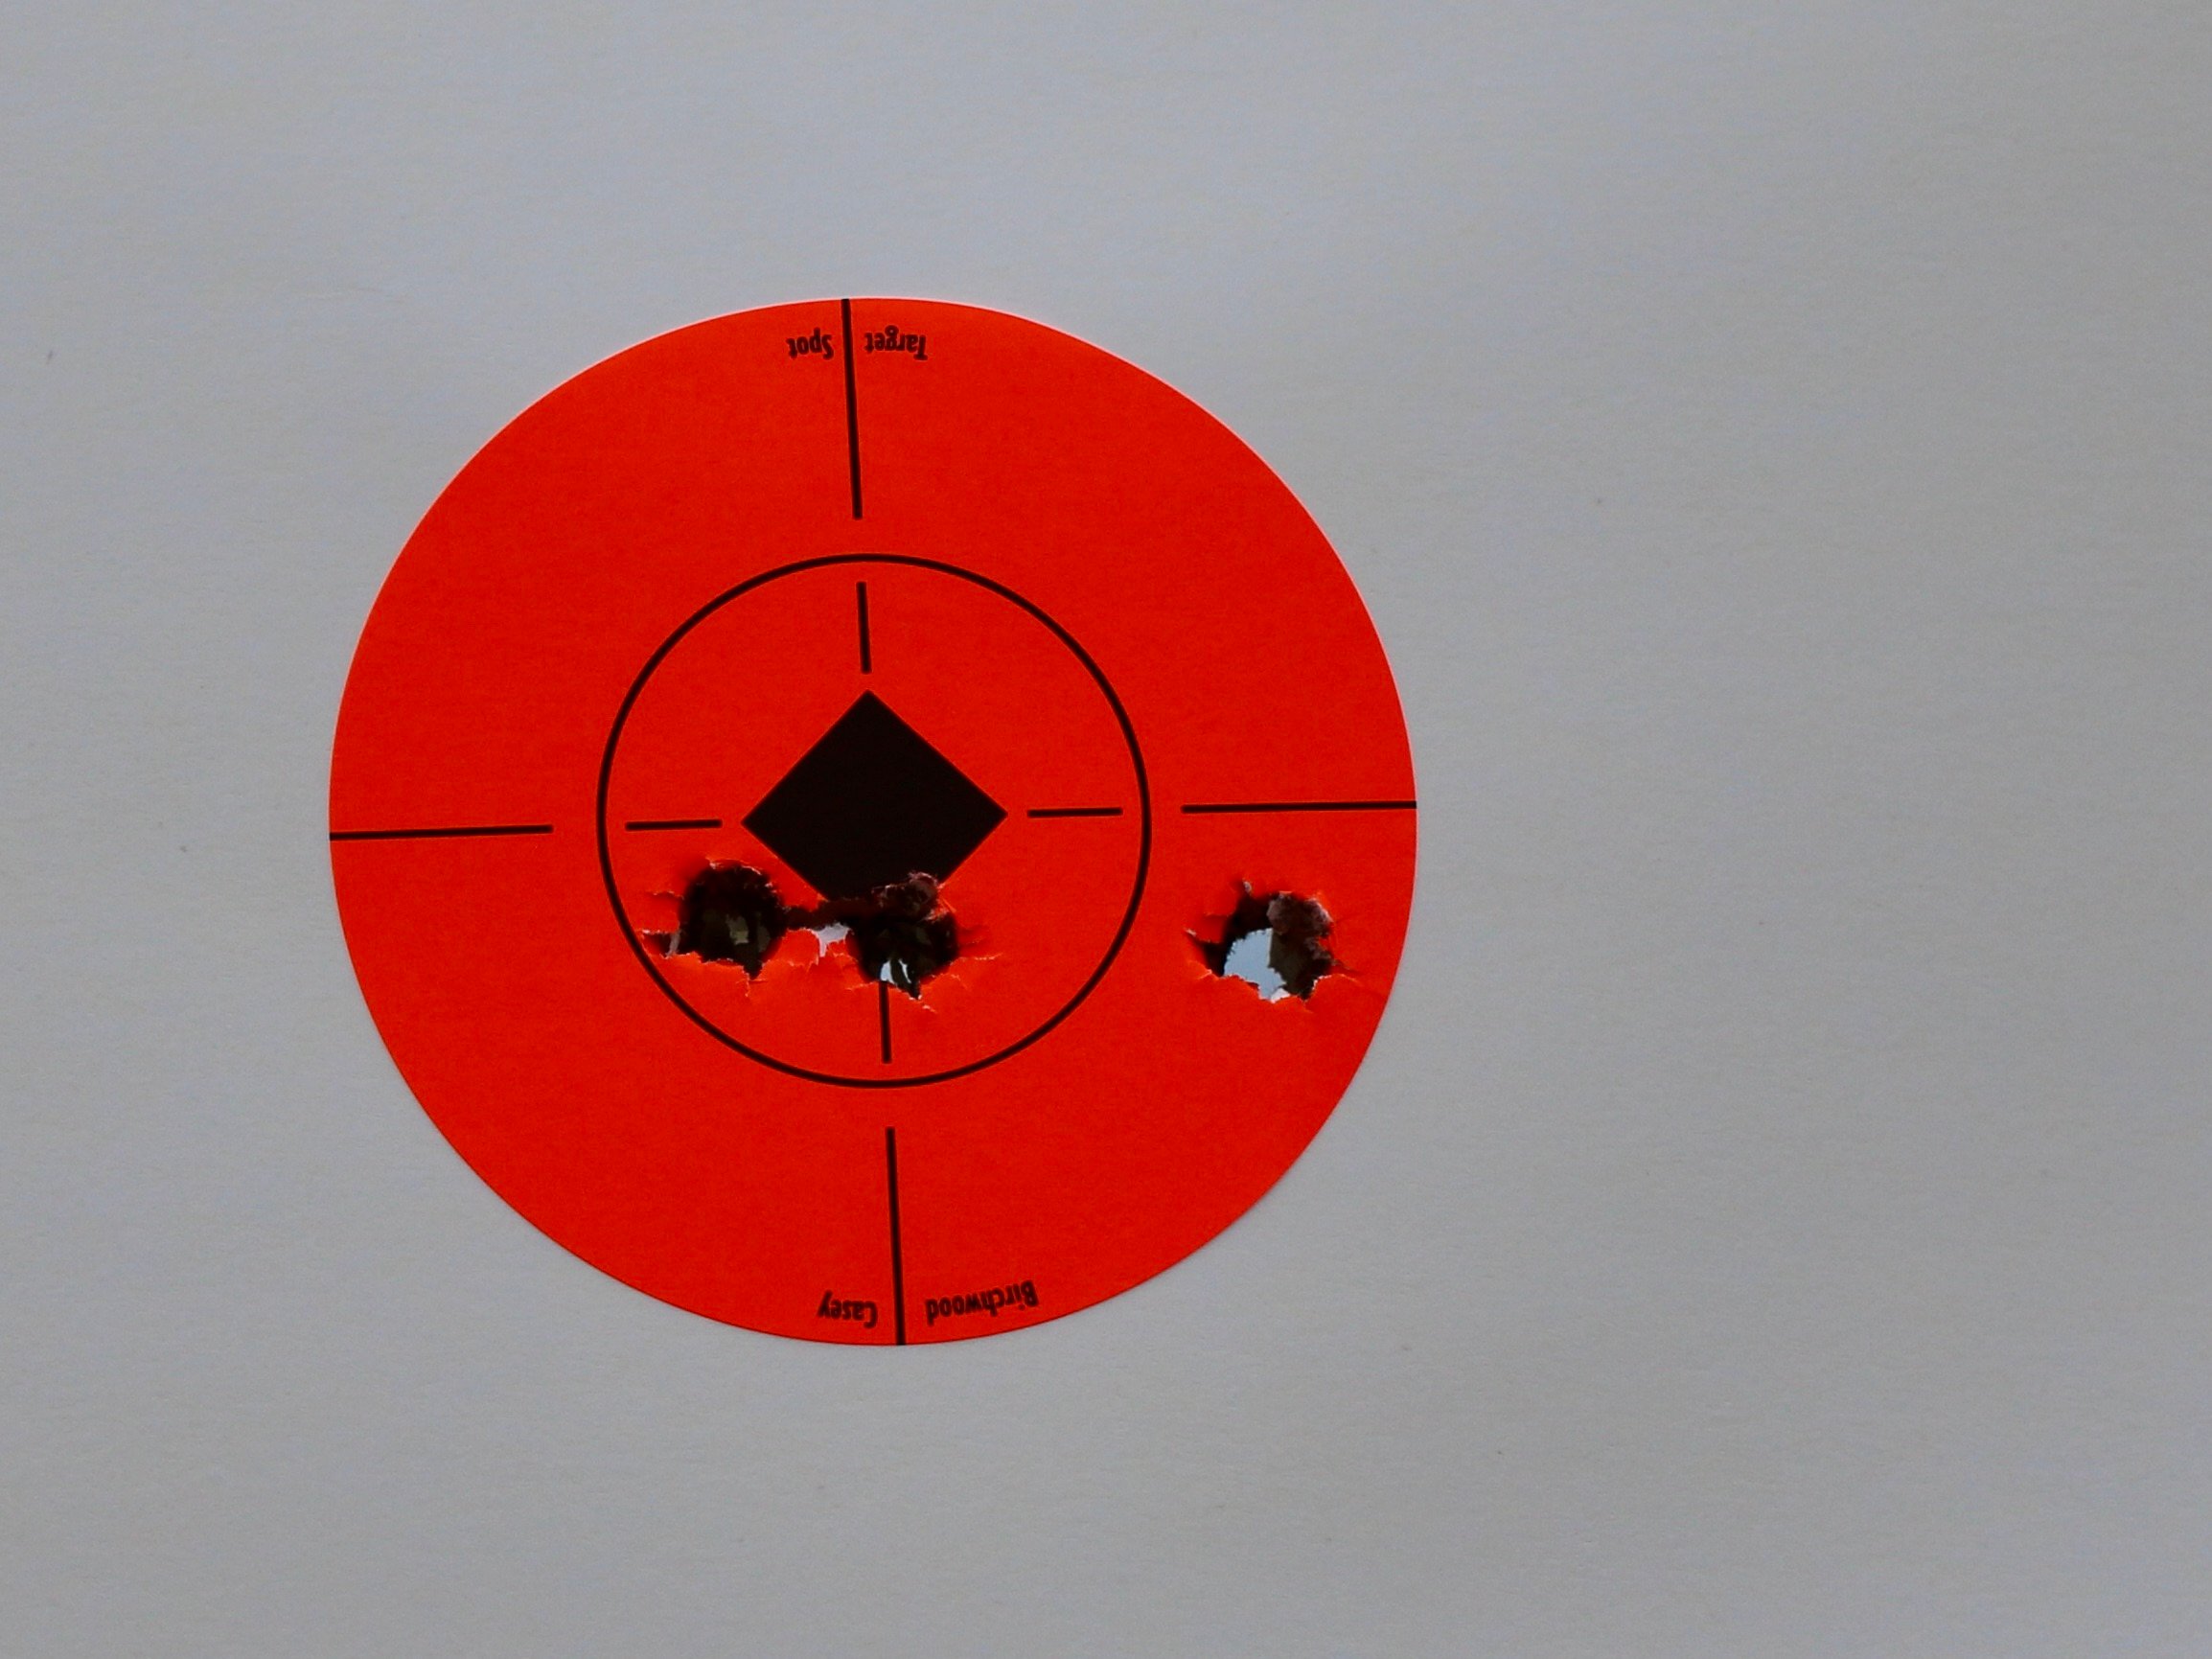 Shooting with the Ruger with a low-powered scope, the PMC performs very well. This group was shot standing, braced, but it shows what's possible. You don't have to give up accuracy, even in range ammo.